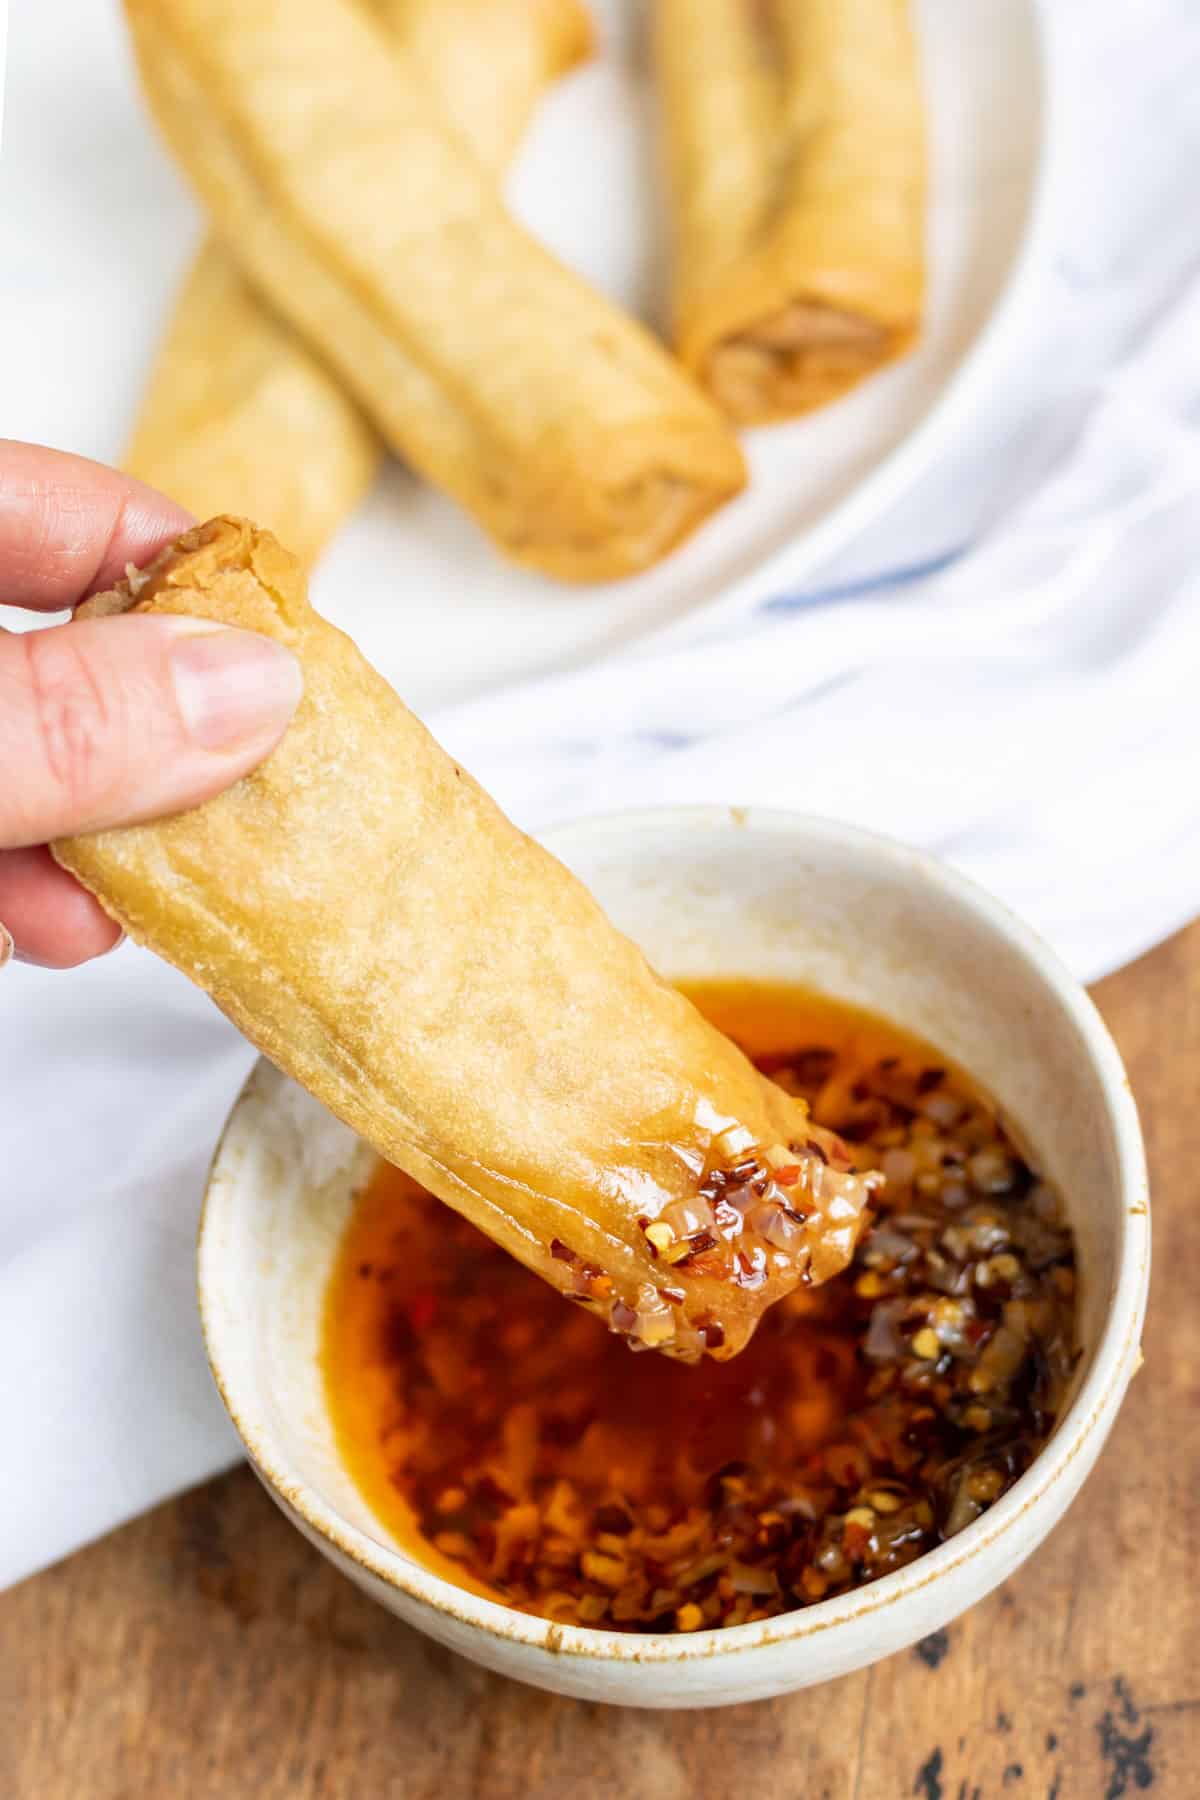 Spring roll in a bowl of dipping sauce.